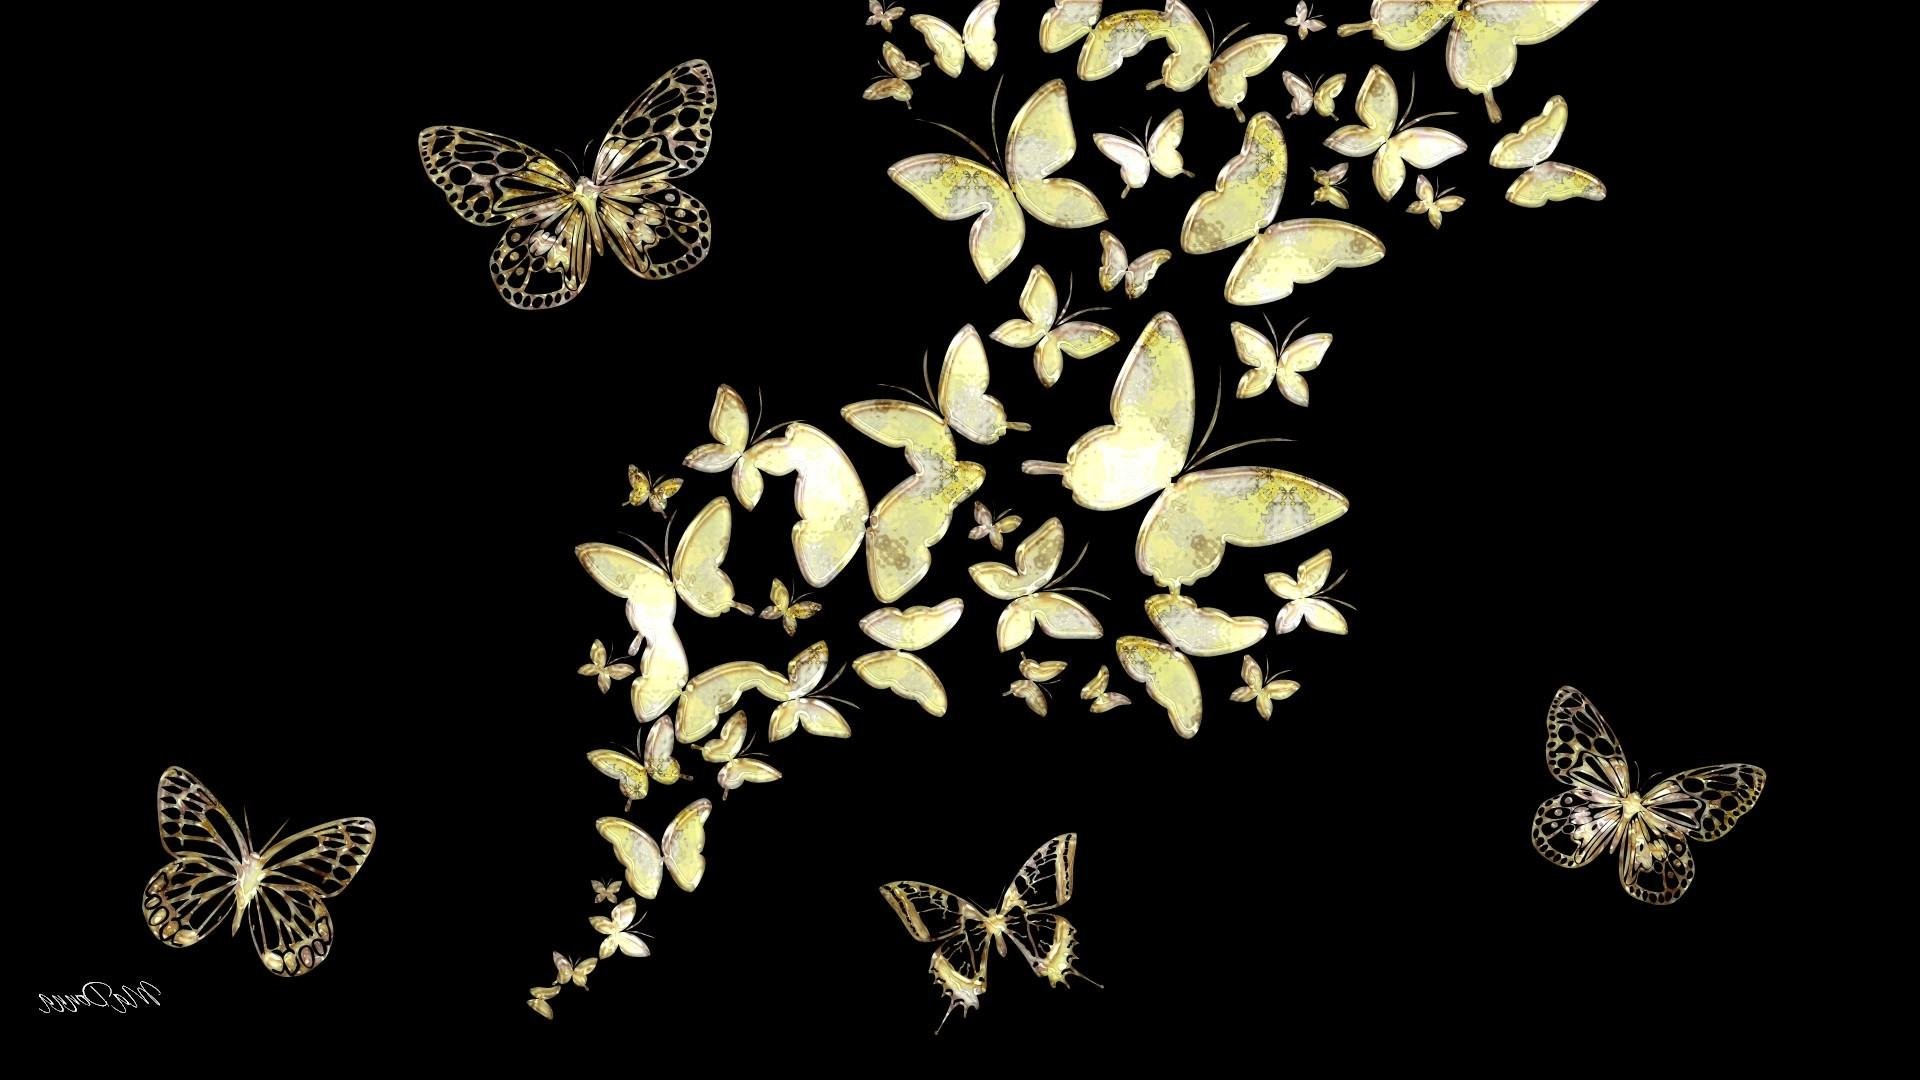 Black Abstract Gold Jewels Butterfly Mirror Data Black And Gold Butterfly Background 1920x1080 Wallpaper Teahub Io